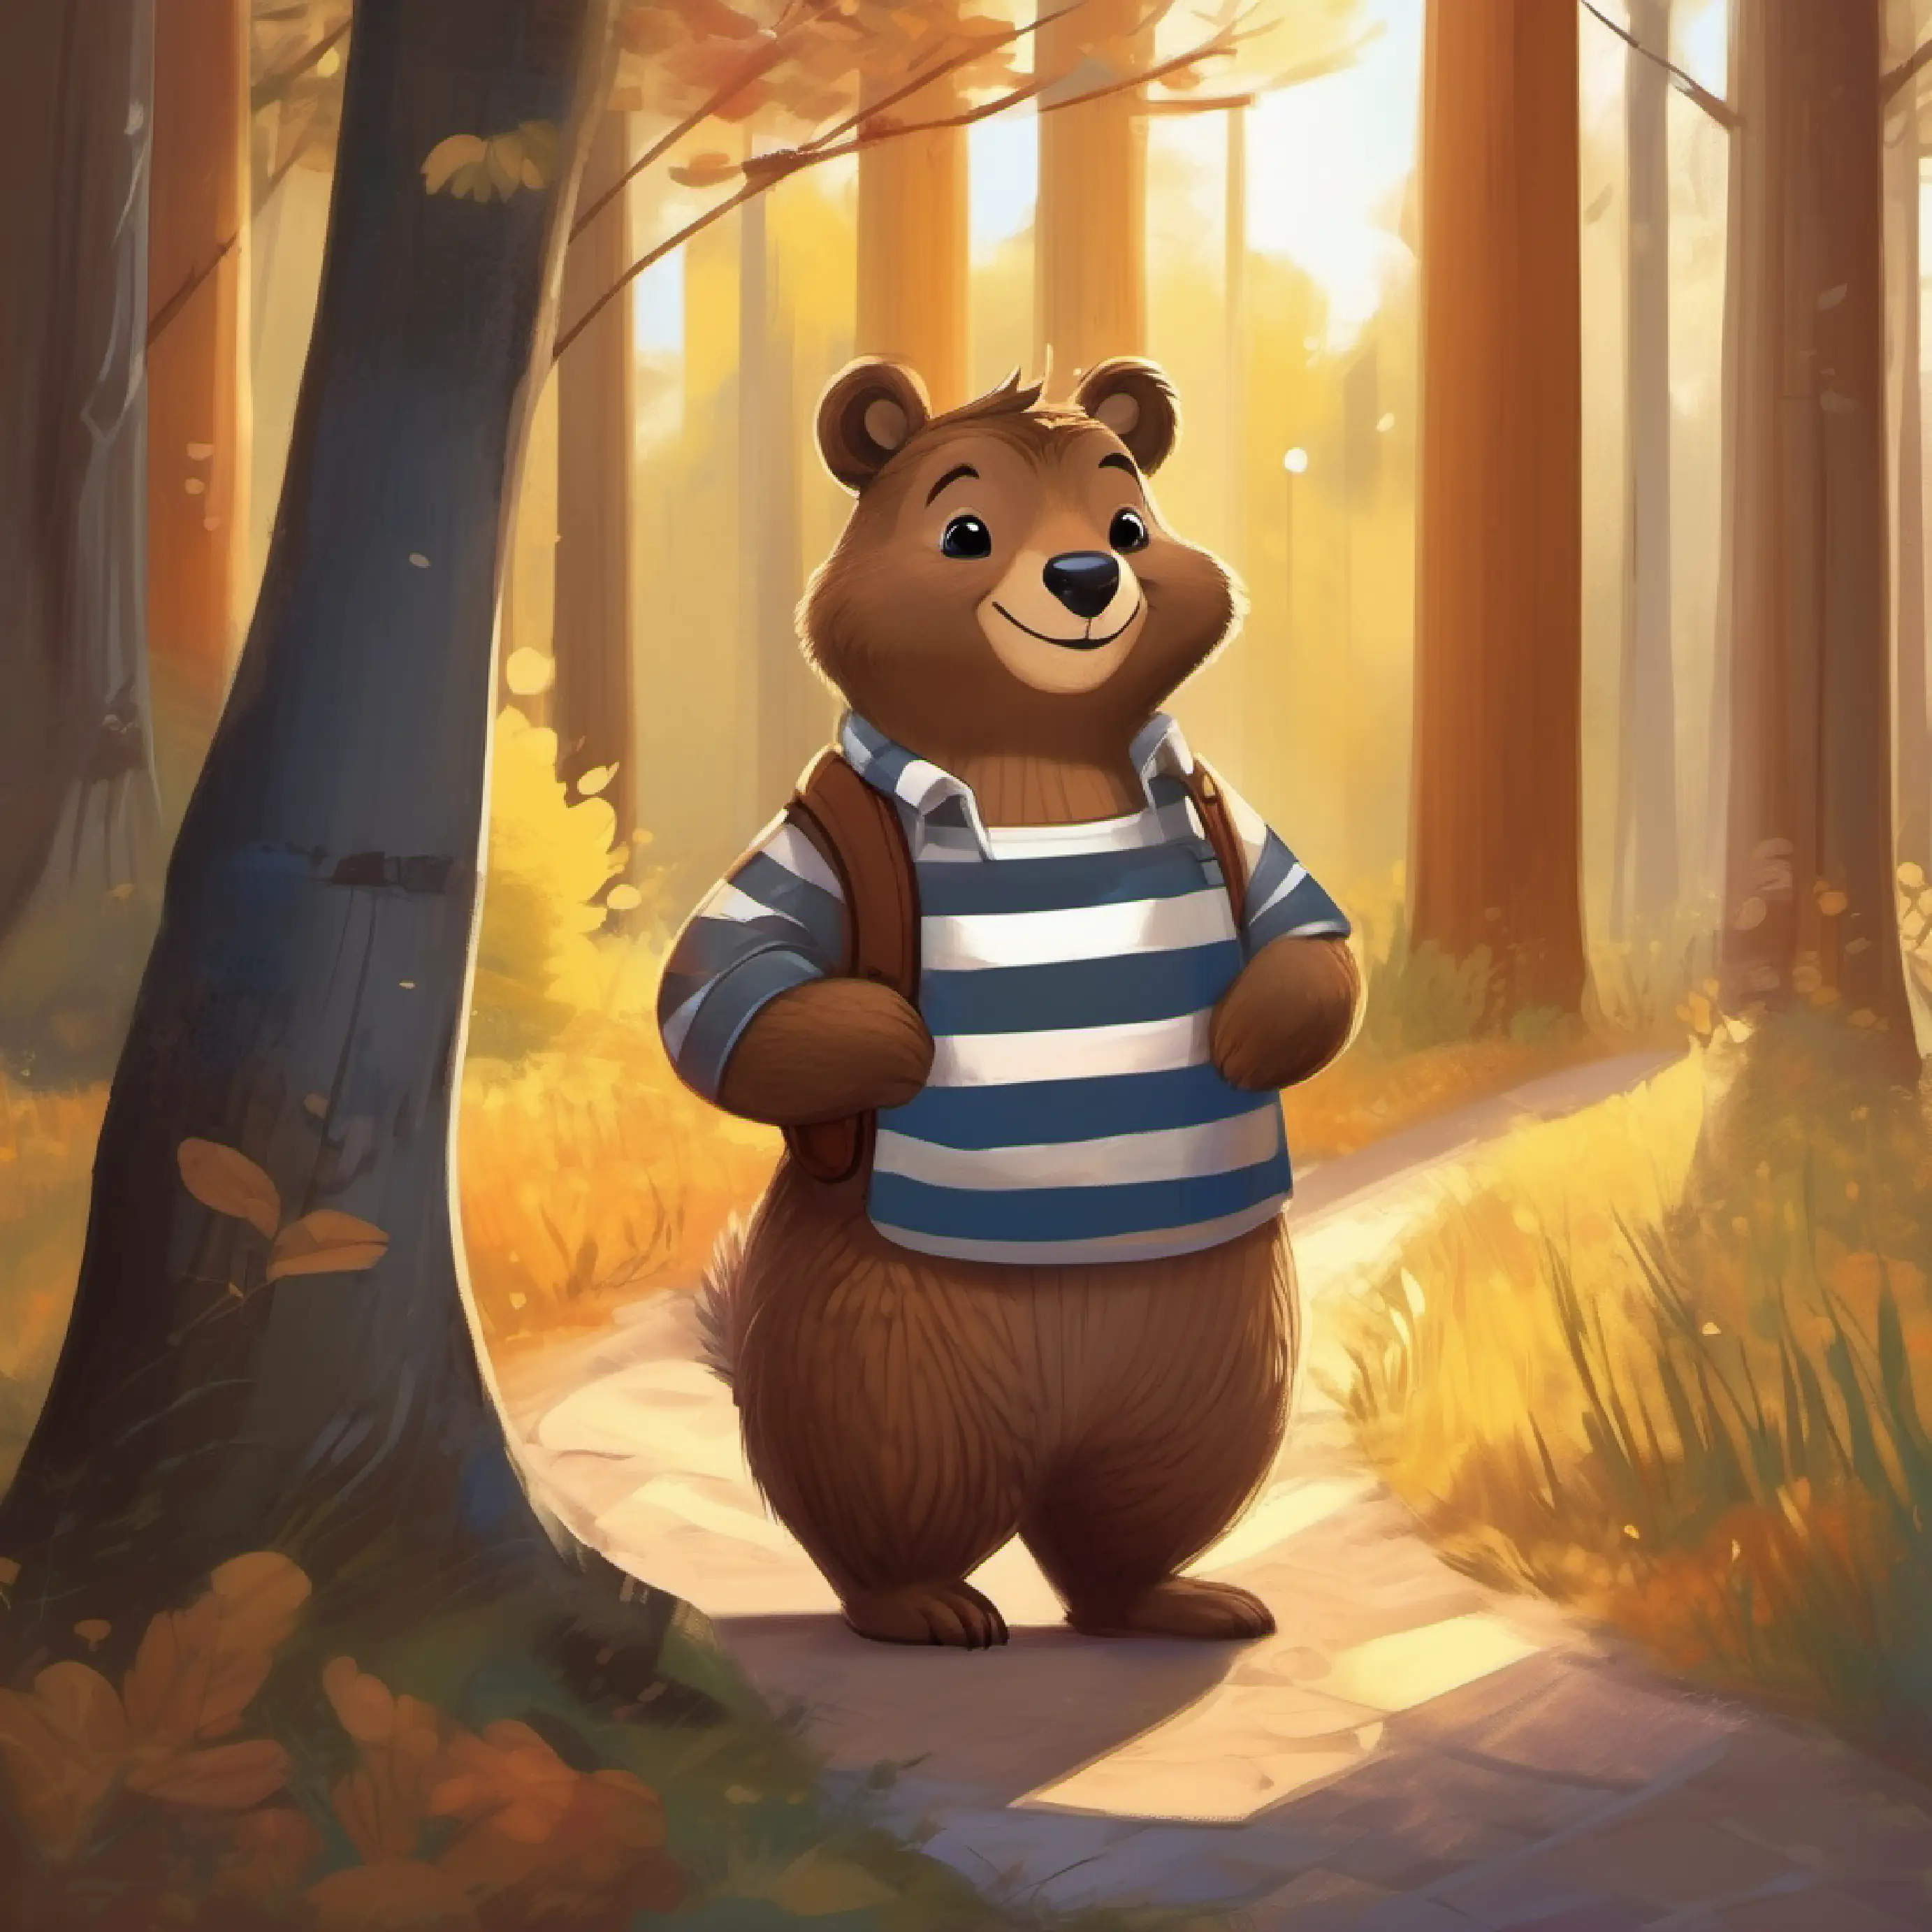 Brown bear with a bright smile and a striped shirt, brown eyes sees Grey squirrel with a shy demeanor, dark eyes alone and reflects on her feelings.